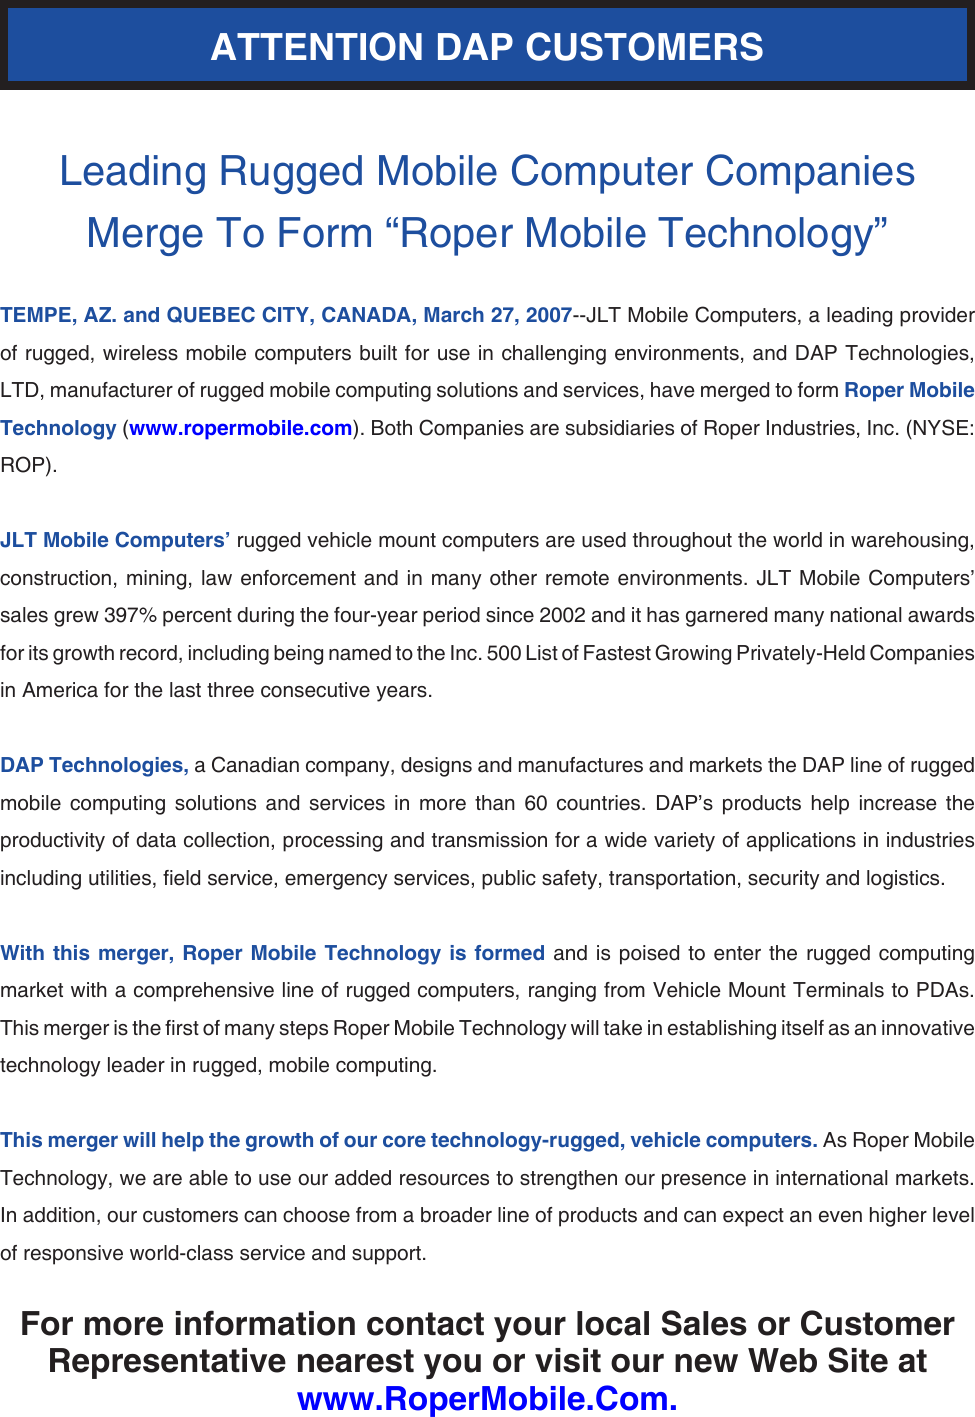 Leading Rugged Mobile Computer Companies Merge To Form “Roper Mobile Technology”TEMPE, AZ. and QUEBEC CITY, CANADA, March 27, 2007--JLT Mobile Computers, a leading provider of rugged, wireless mobile computers built for use in challenging environments, and DAP Technologies, LTD, manufacturer of rugged mobile computing solutions and services, have merged to form Roper Mobile Technology (www.ropermobile.com). Both Companies are subsidiaries of Roper Industries, Inc. (NYSE: ROP).JLT Mobile Computers’ rugged vehicle mount computers are used throughout the world in warehousing, construction, mining,  law enforcement  and in  many other  remote environments.  JLT Mobile  Computers’ sales grew 397% percent during the four-year period since 2002 and it has garnered many national awards for its growth record, including being named to the Inc. 500 List of Fastest Growing Privately-Held Companies in America for the last three consecutive years.DAP Technologies, a Canadian company, designs and manufactures and markets the DAP line of rugged mobile  computing  solutions  and  services  in  more  than  60  countries.  DAP’s  products  help  increase  the productivity of data collection, processing and transmission for a wide variety of applications in industries including utilities, eld service, emergency services, public safety, transportation, security and logistics.With this  merger, Roper Mobile Technology is formed and is poised  to enter  the rugged computing market with a comprehensive line of rugged computers, ranging from Vehicle Mount Terminals to PDAs. This merger is the rst of many steps Roper Mobile Technology will take in establishing itself as an innovative technology leader in rugged, mobile computing.This merger will help the growth of our core technology-rugged, vehicle computers. As Roper Mobile Technology, we are able to use our added resources to strengthen our presence in international markets. In addition, our customers can choose from a broader line of products and can expect an even higher level of responsive world-class service and support.For more information contact your local Sales or Customer Representative nearest you or visit our new Web Site at www.RoperMobile.Com.ATTENTION DAP CUSTOMERS